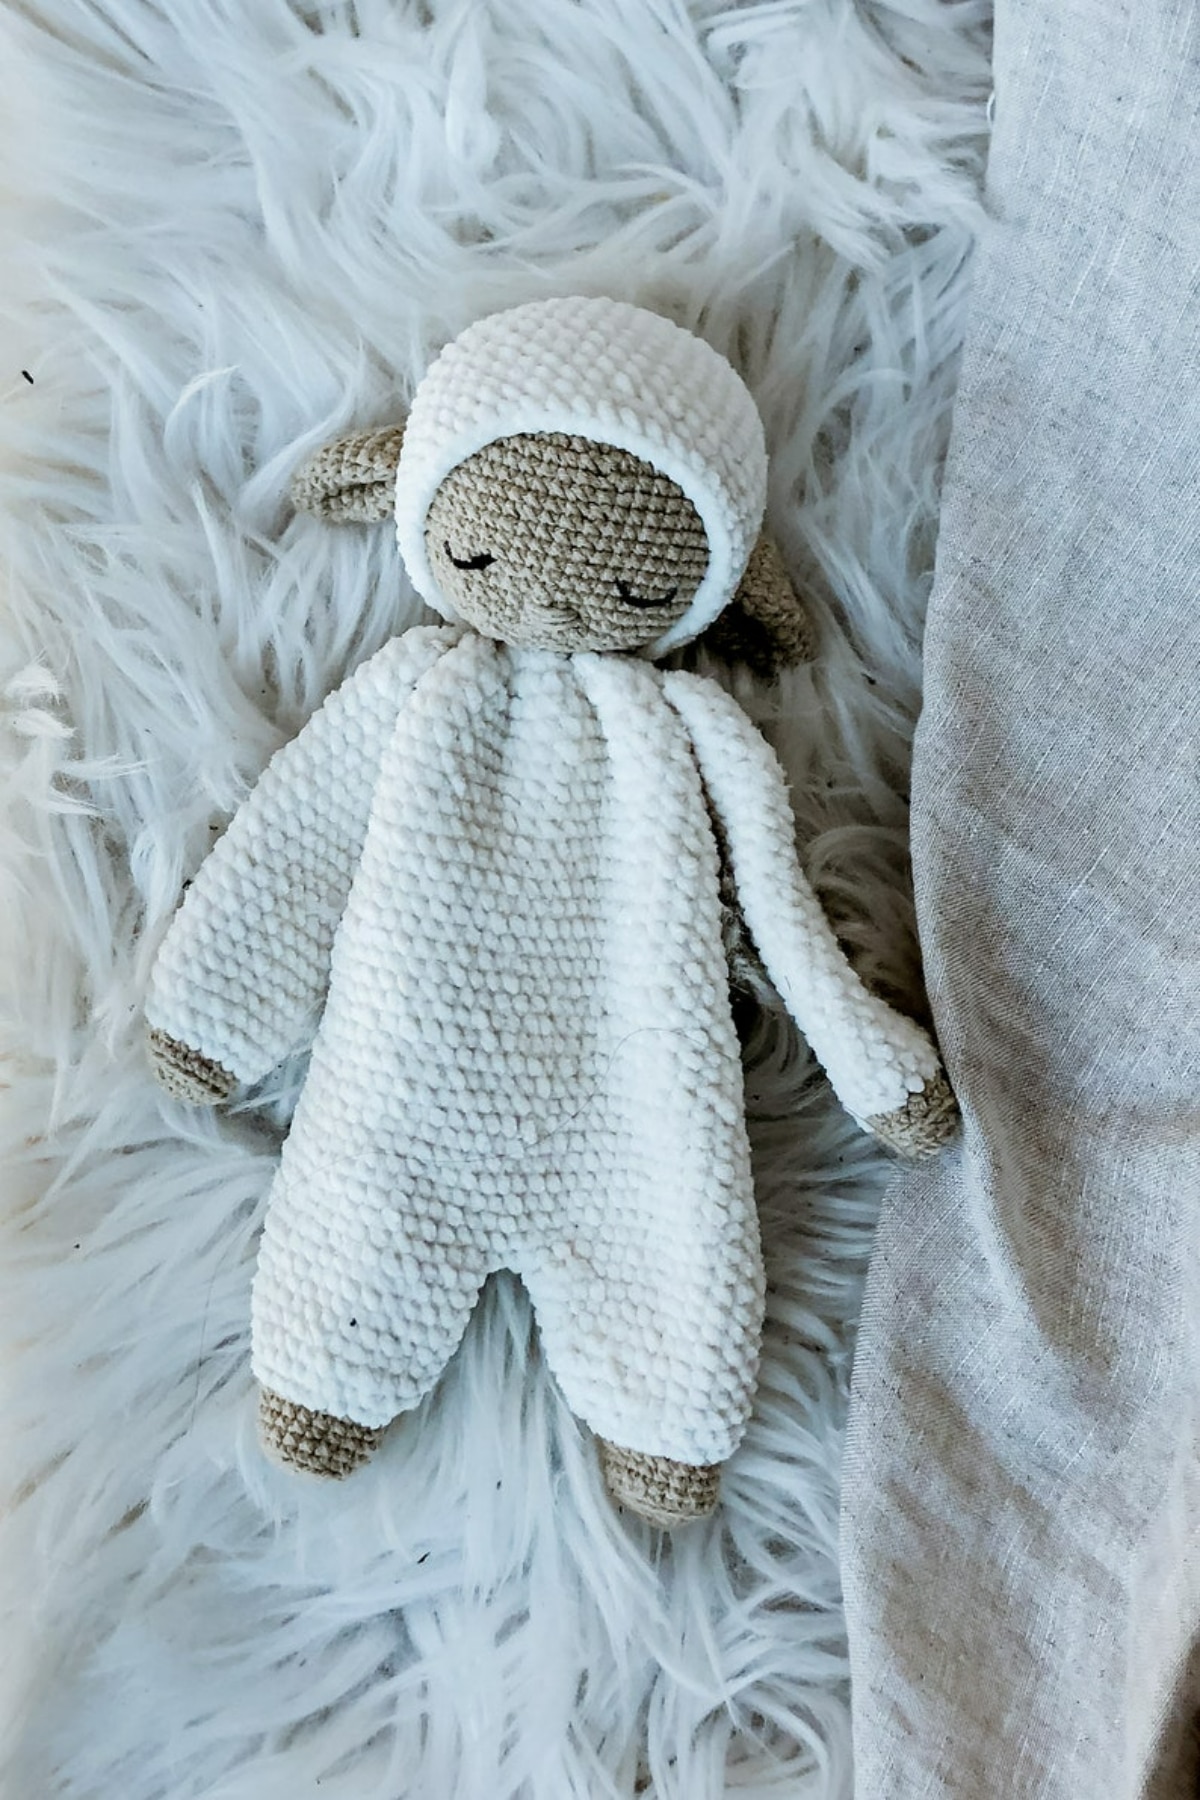 White textured crochet lamb with beige feet and ears asleep on a white fluffy blanket.